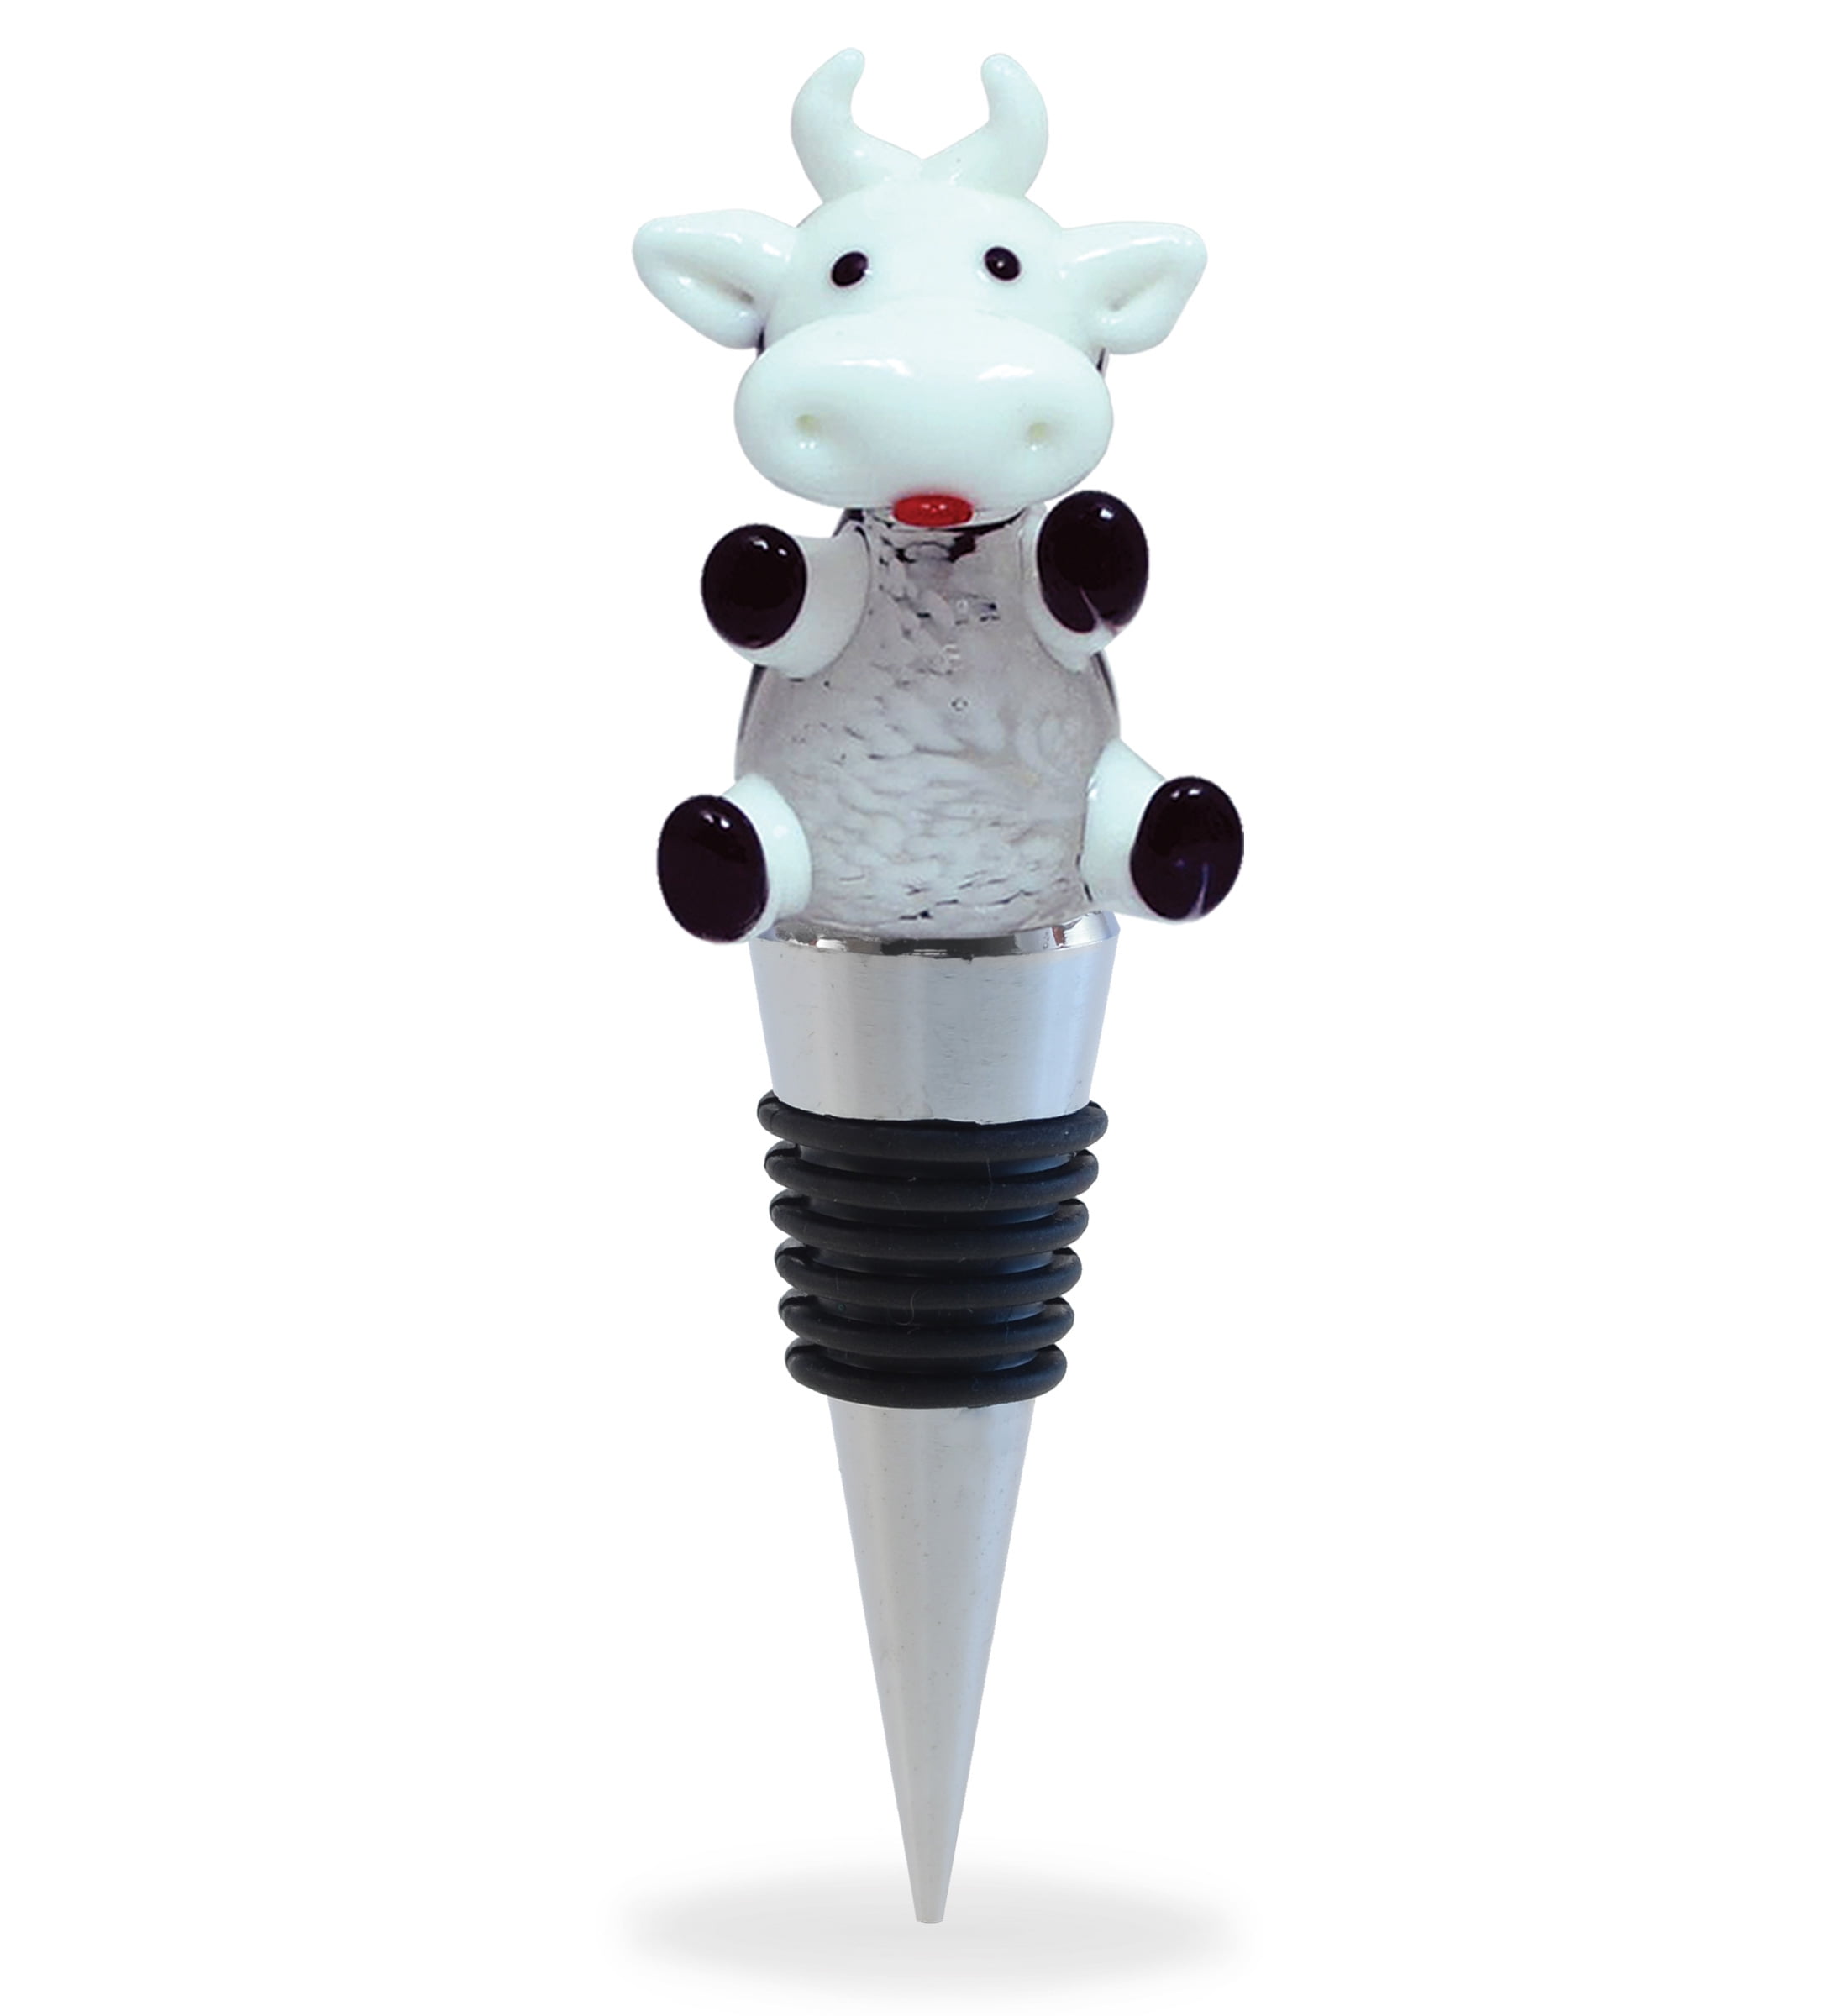 Cheers Cow Glass Wine Stopper – Cute Vacuum Seal Reusable Farm